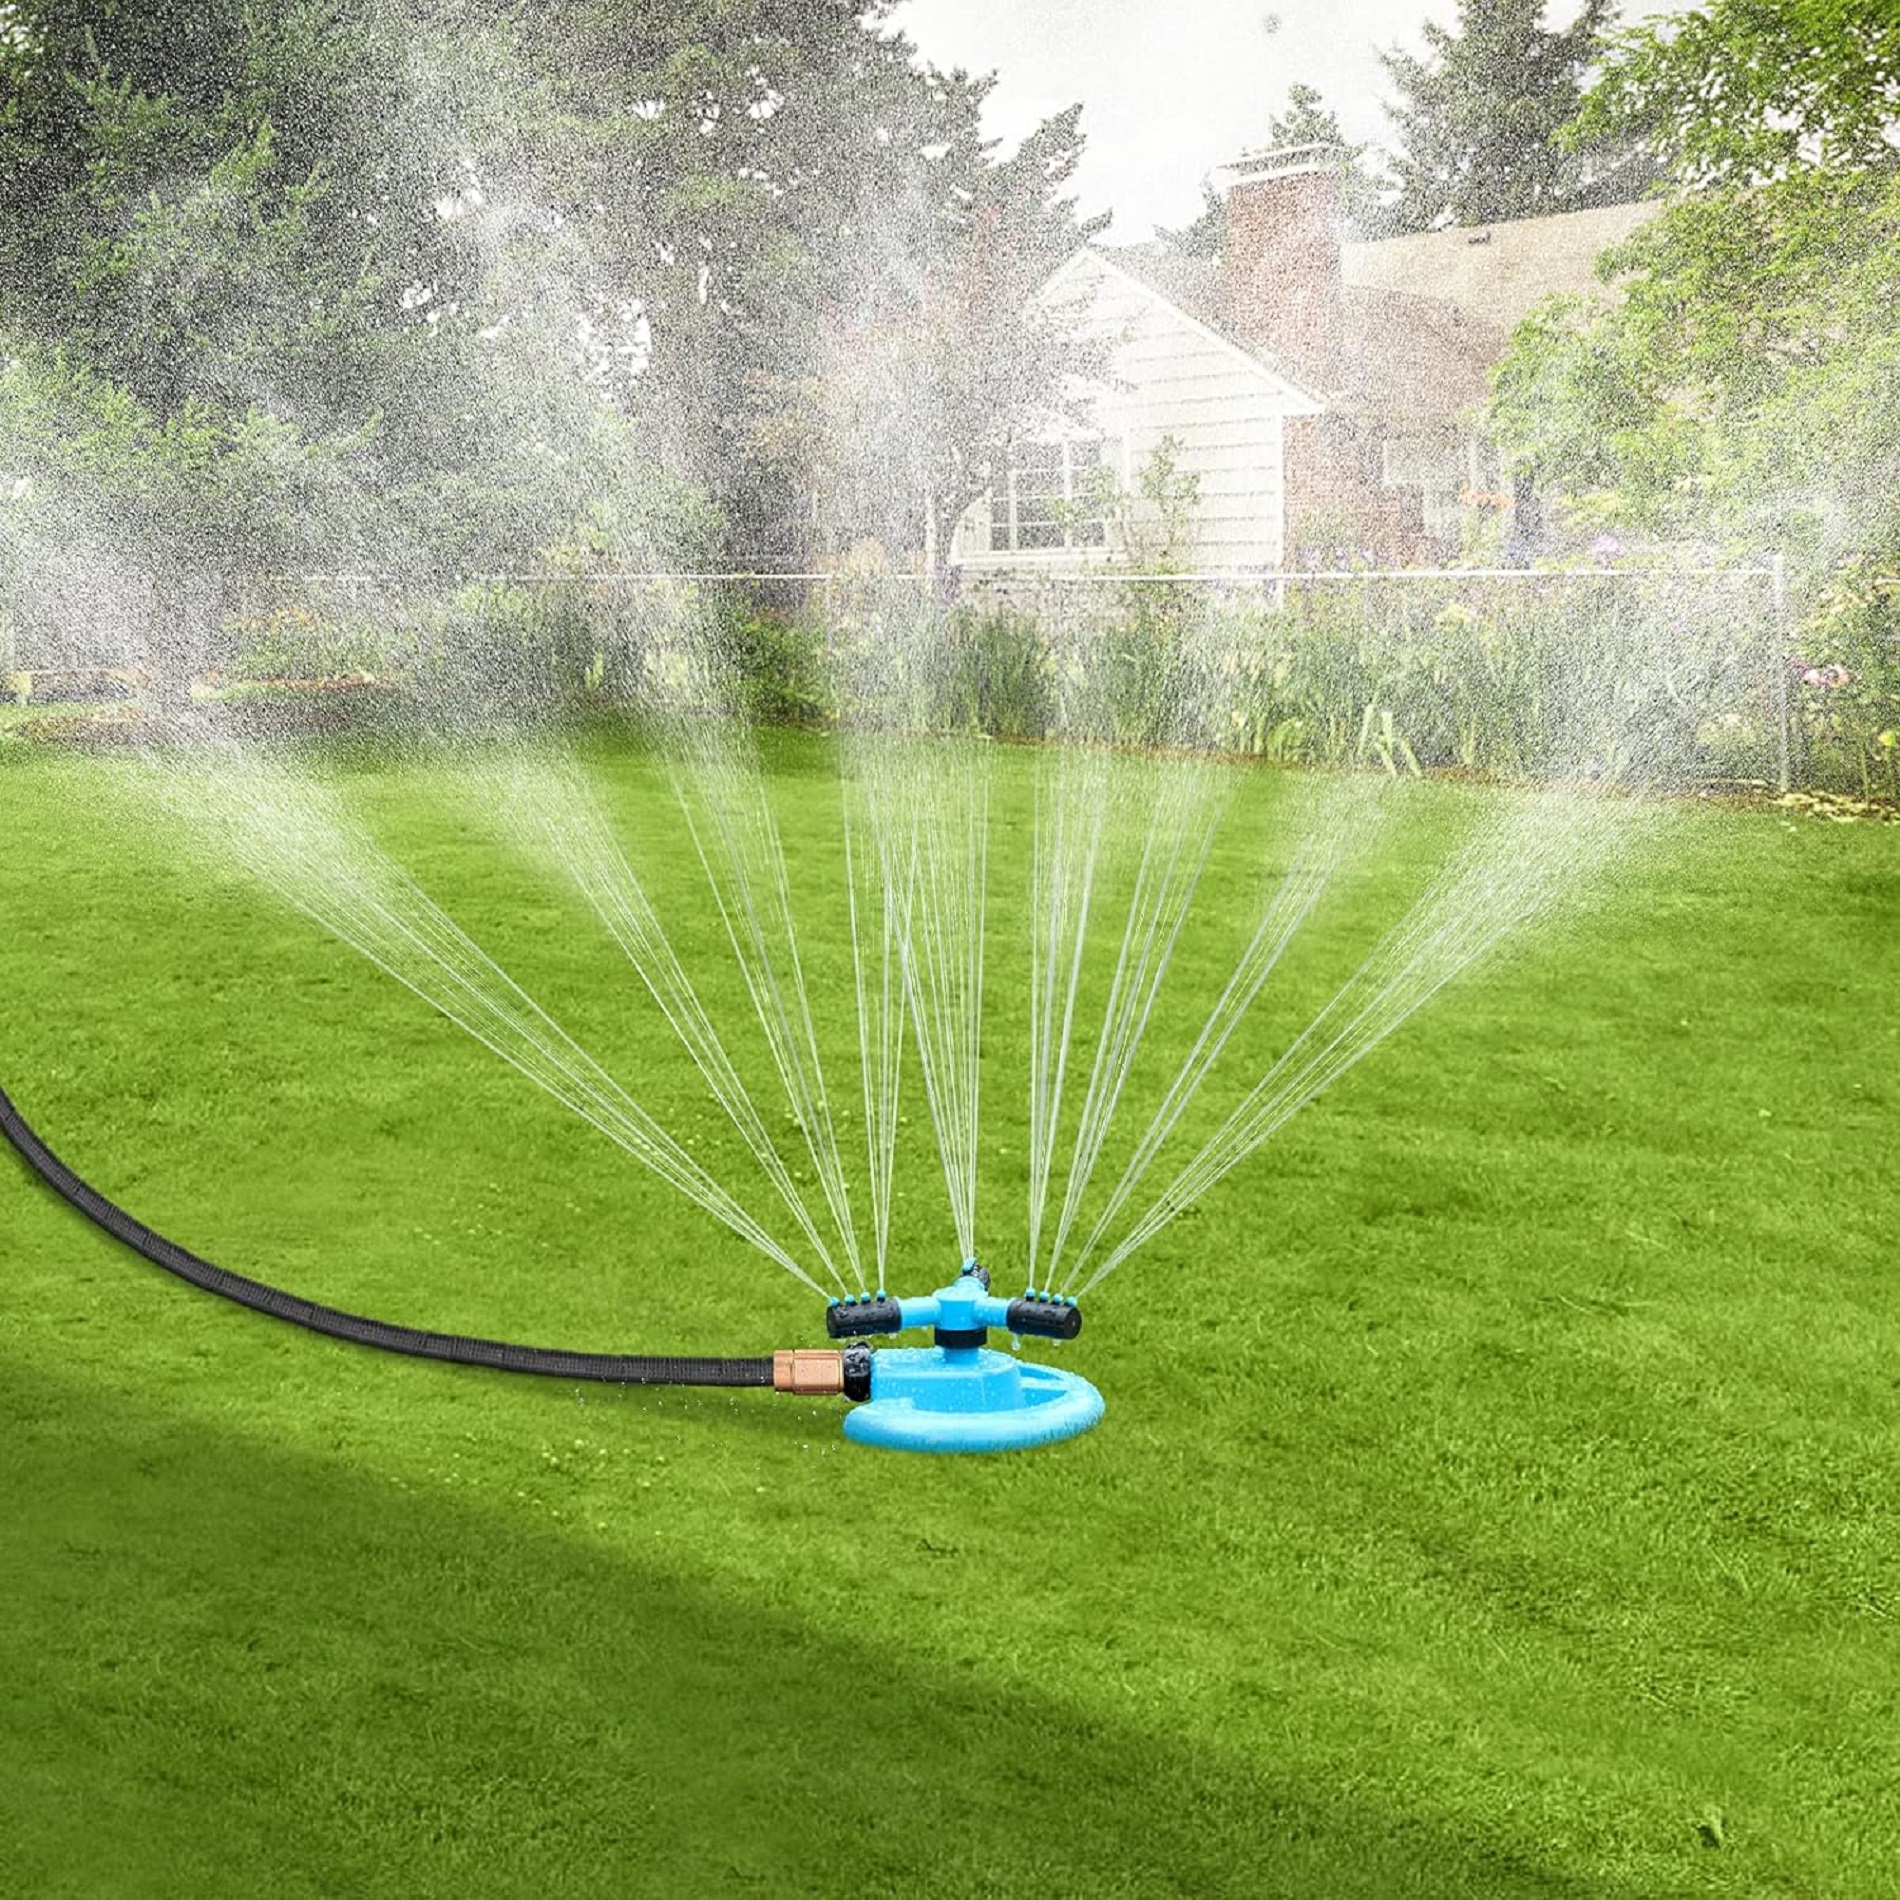 4 Common Water Sprinkler Emergencies And How To Fix Them 1